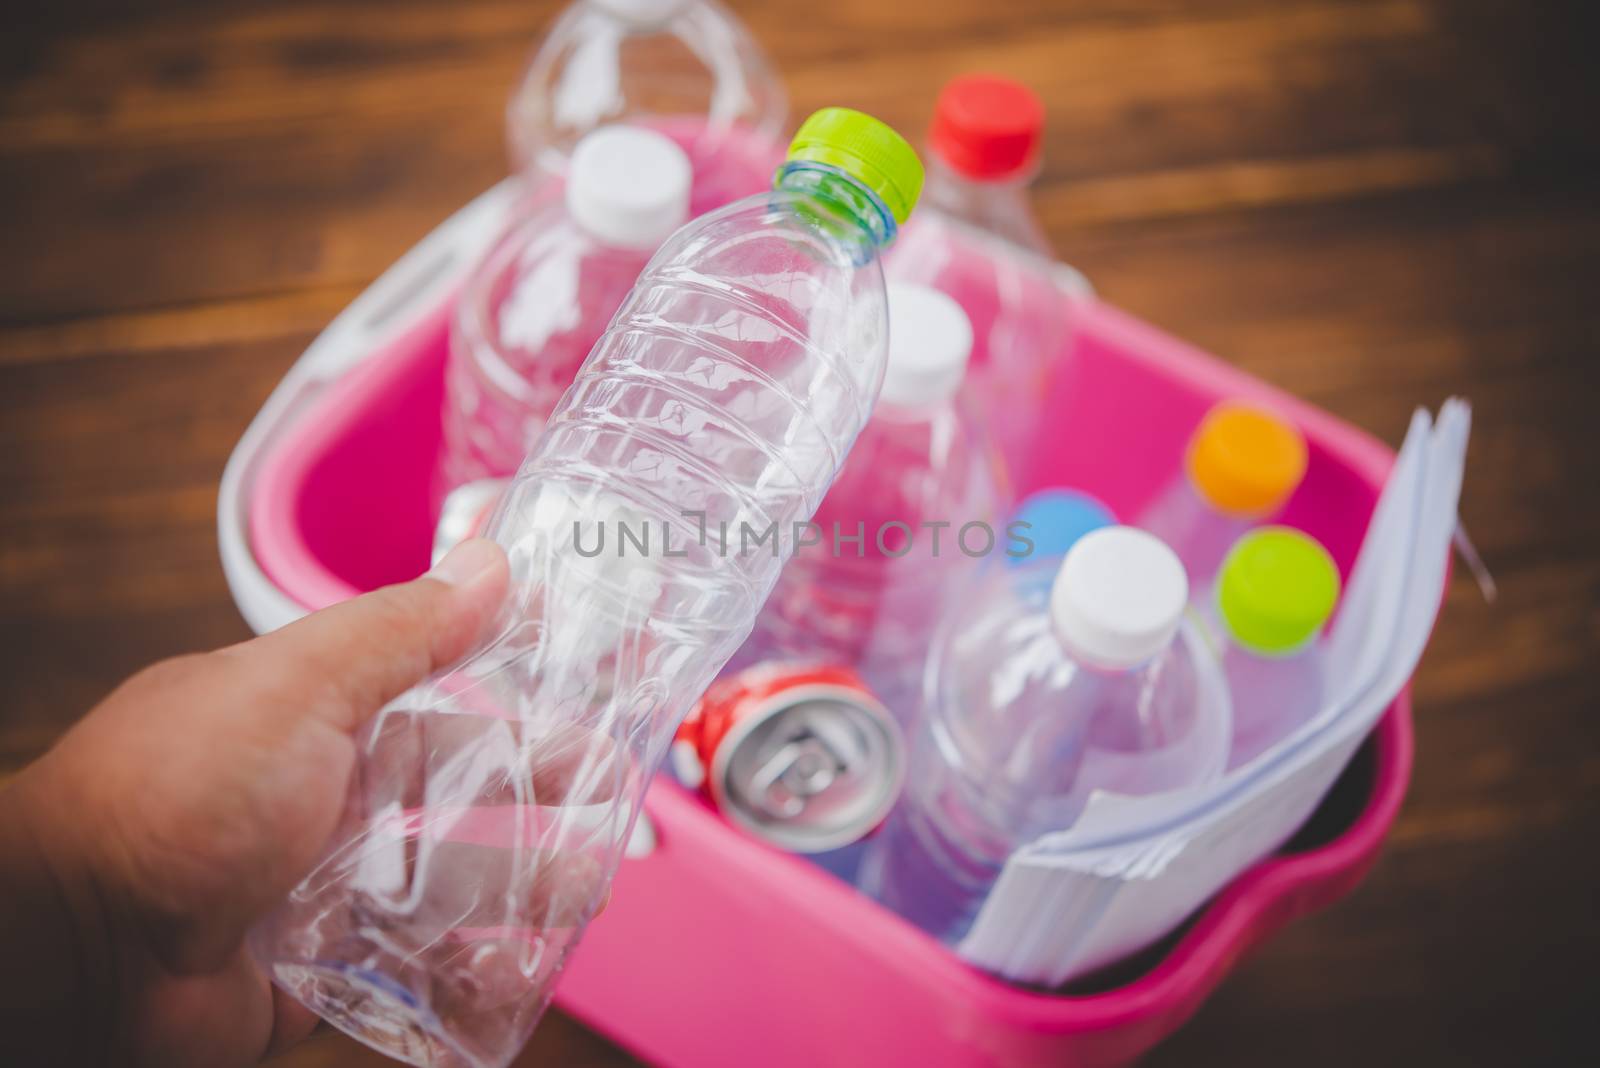 Hands holding bottles for recycling, green concept by photobyphotoboy